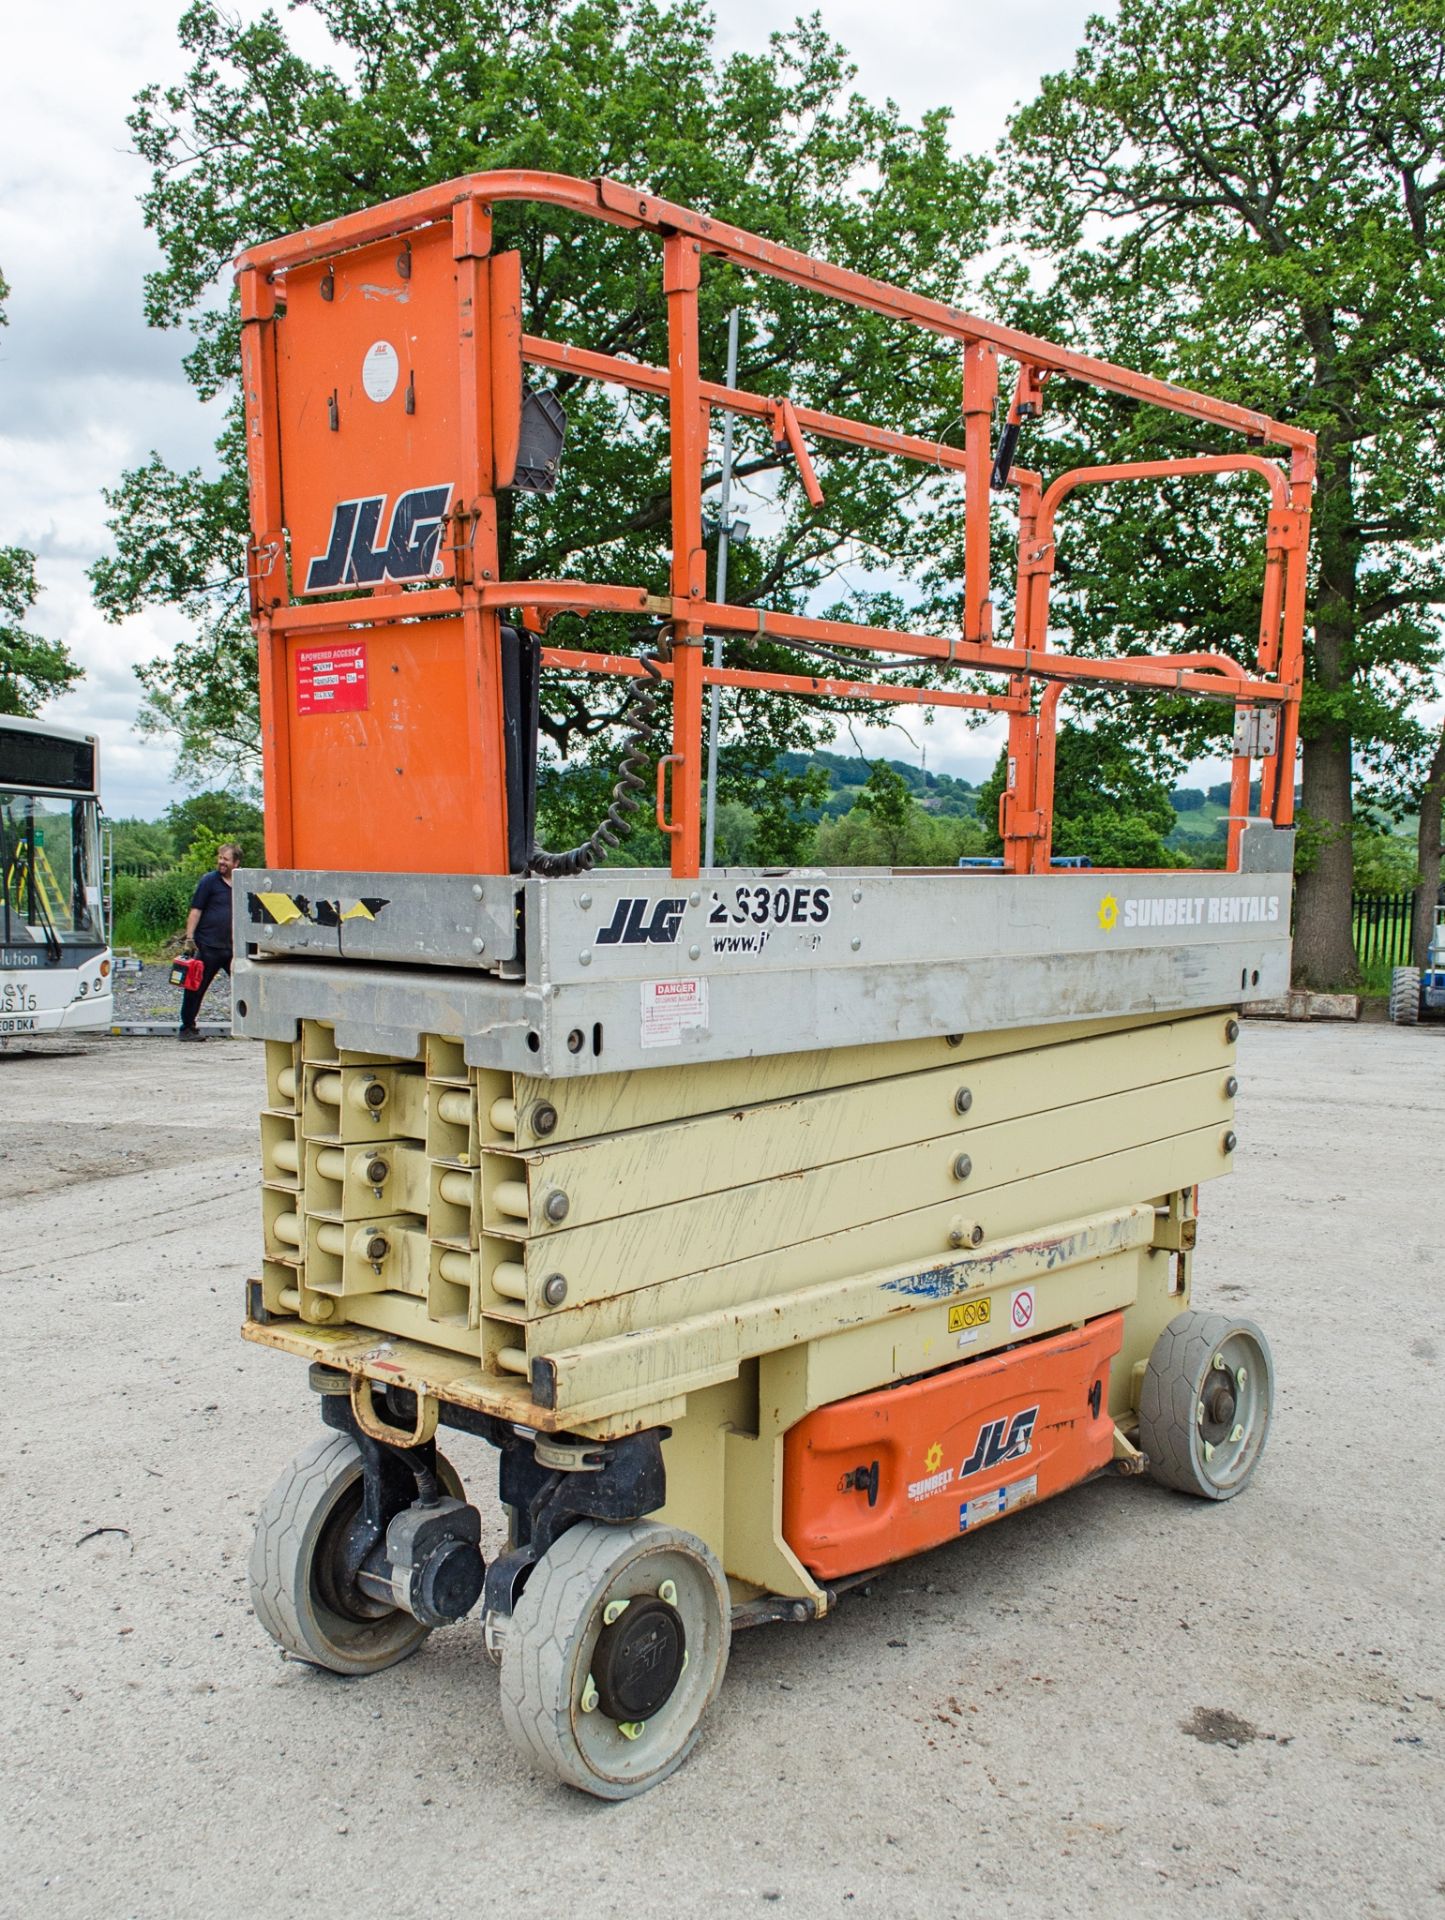 JLG 2630 ES battery electric scissor lift Year: 2014 S/N: 237301 Recorded Hours: 251 A636977